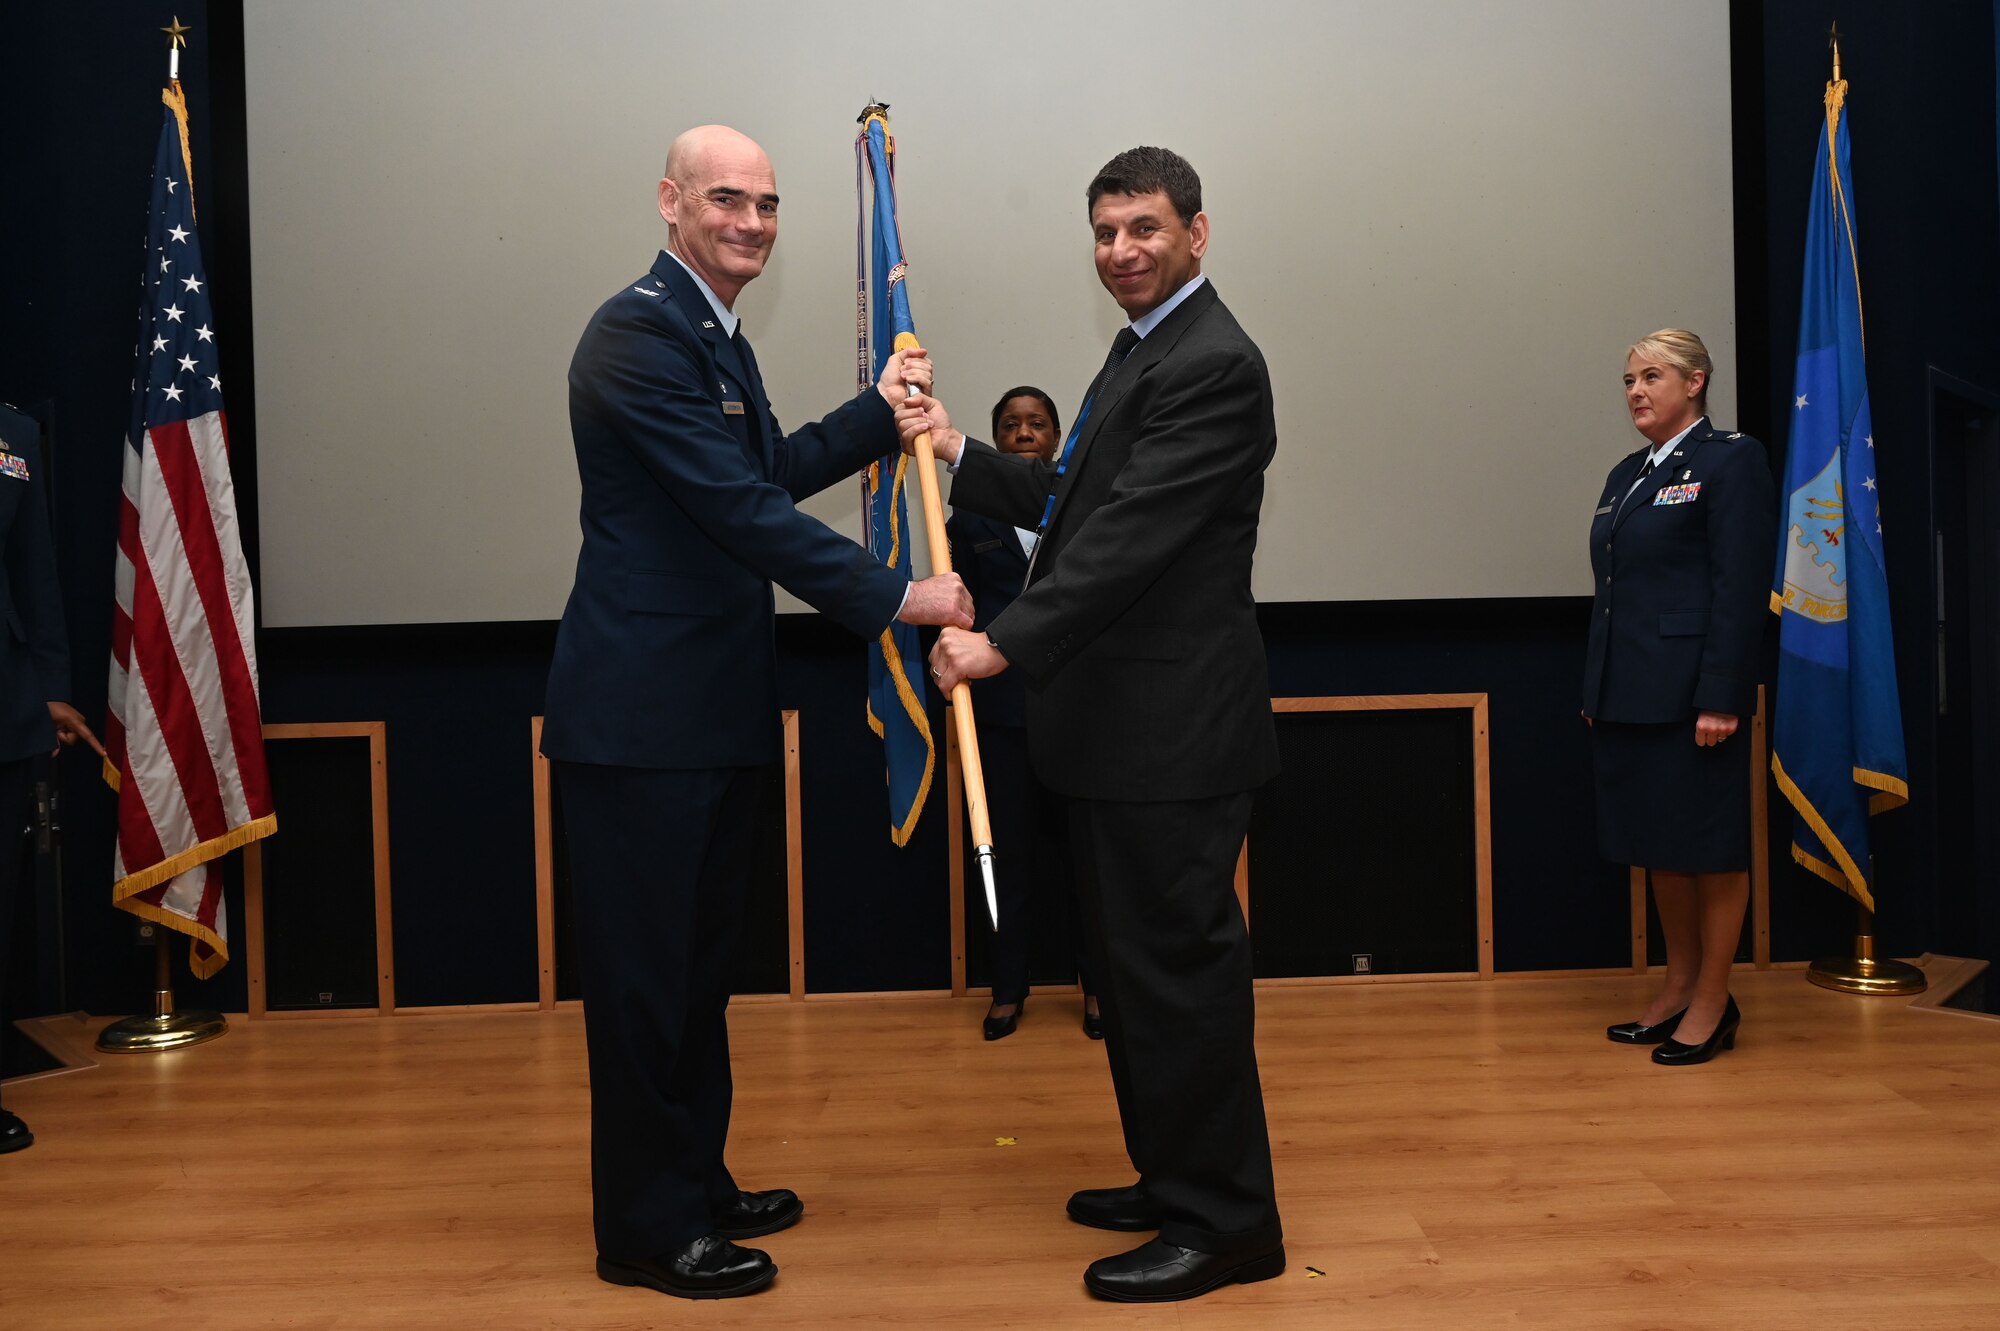 Col. William Gutermuth, 433rd Airlift Wing commander, hands the 433rd AW guidon to Dr. Suhail Daraiseh, chiropractor at Sana Welllness & Health, during the Honorary Commanders’ Induction Ceremony in on Joint Base San Antonio-Lackland, Texas, Oct. 15, 2023. Honorary commanders have opportunities to learn about their units and commanders through C-5M Super Galaxy tours, demonstrations, events and flights.